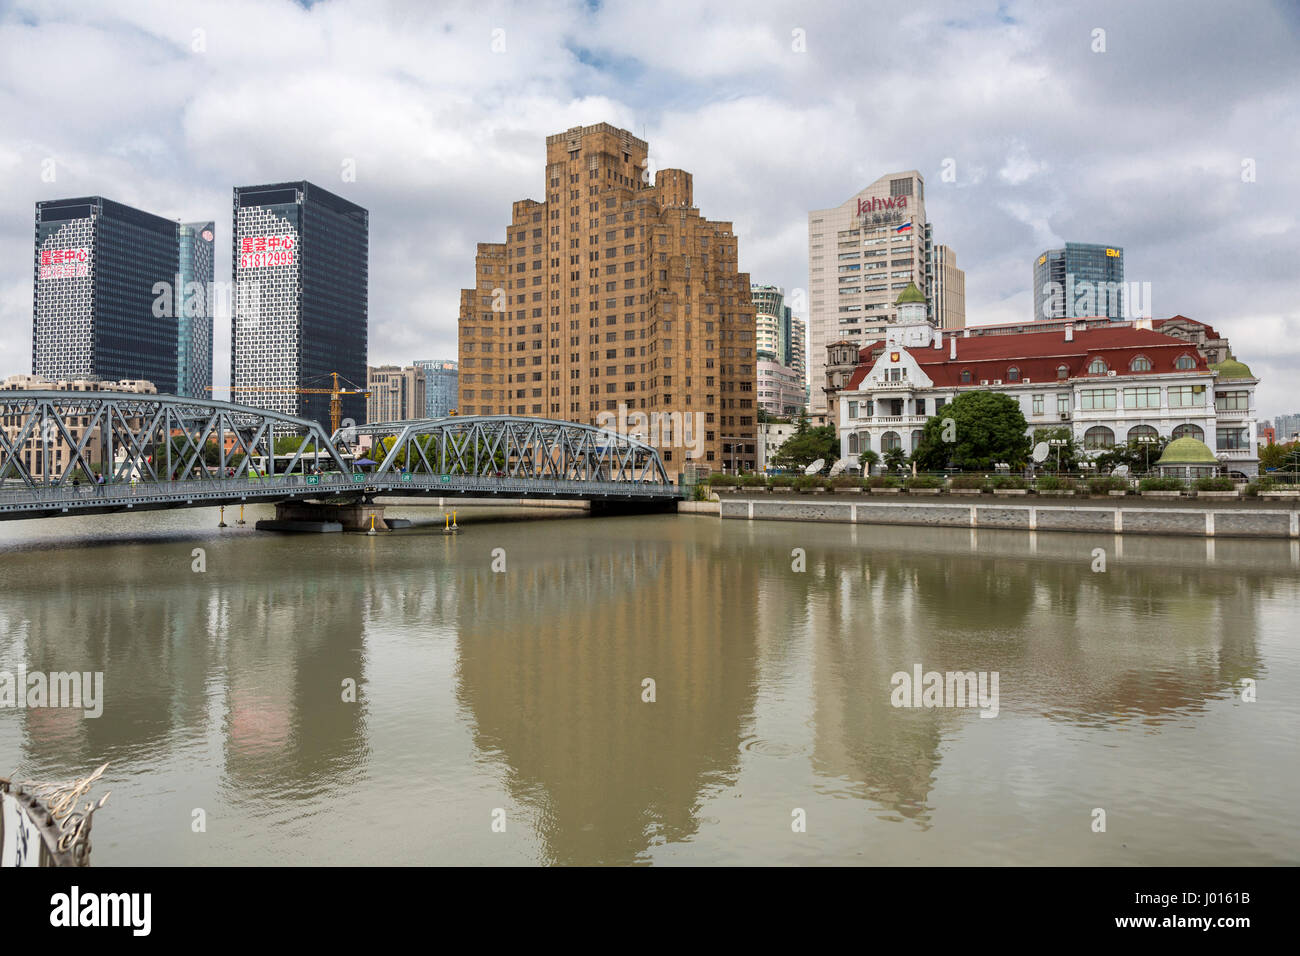 China, Shanghai.  Russian Consulate, old building on right.  Broadway Mansions Hotel in center.  Waibaidu Bridge (Garden Bridge) on left. Stock Photo